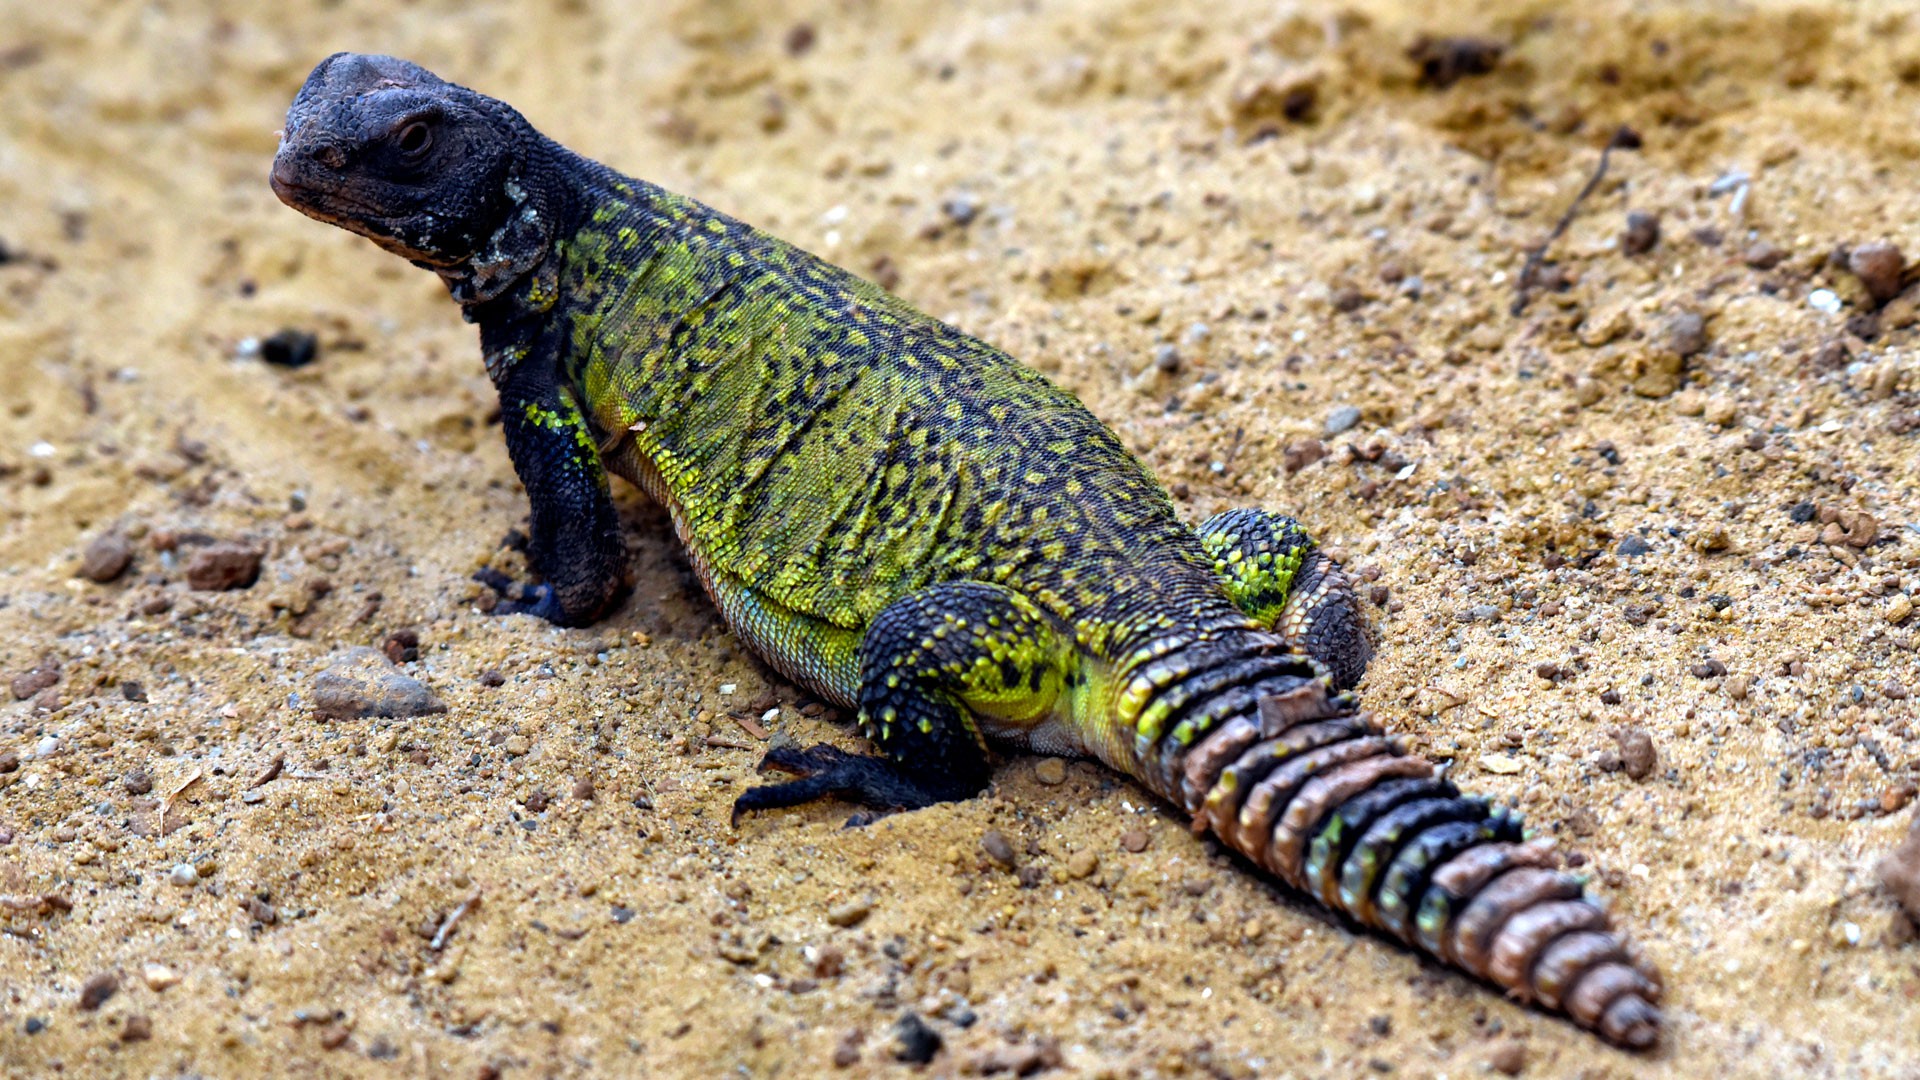 Spiny-tailed lizard